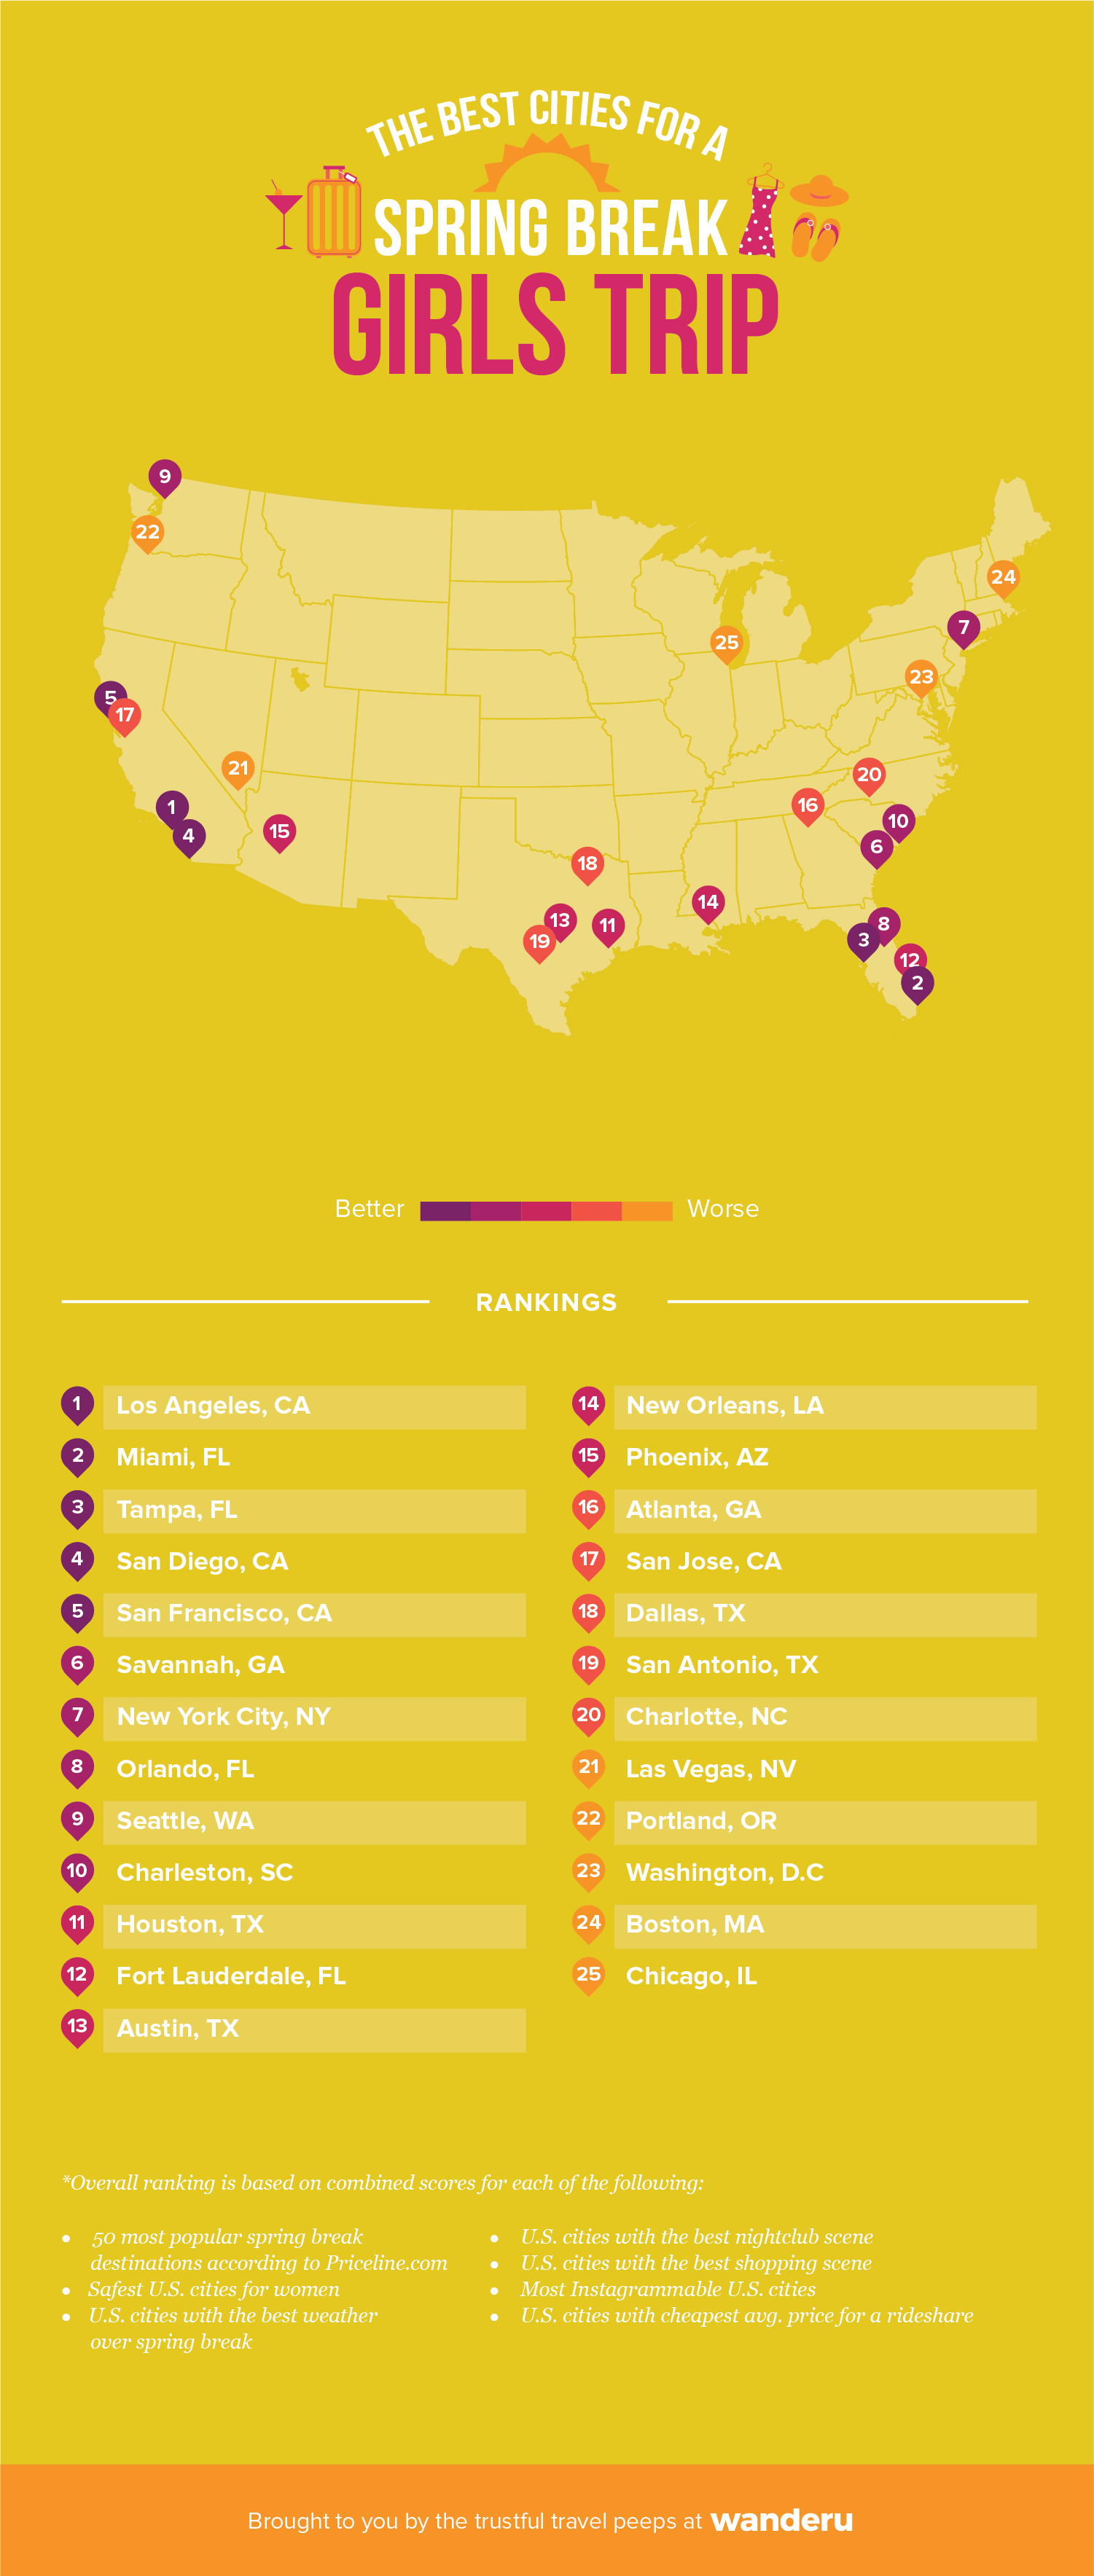 Map plotting the best cities for a spring break girls trip, along with a ranking of the cities below it.